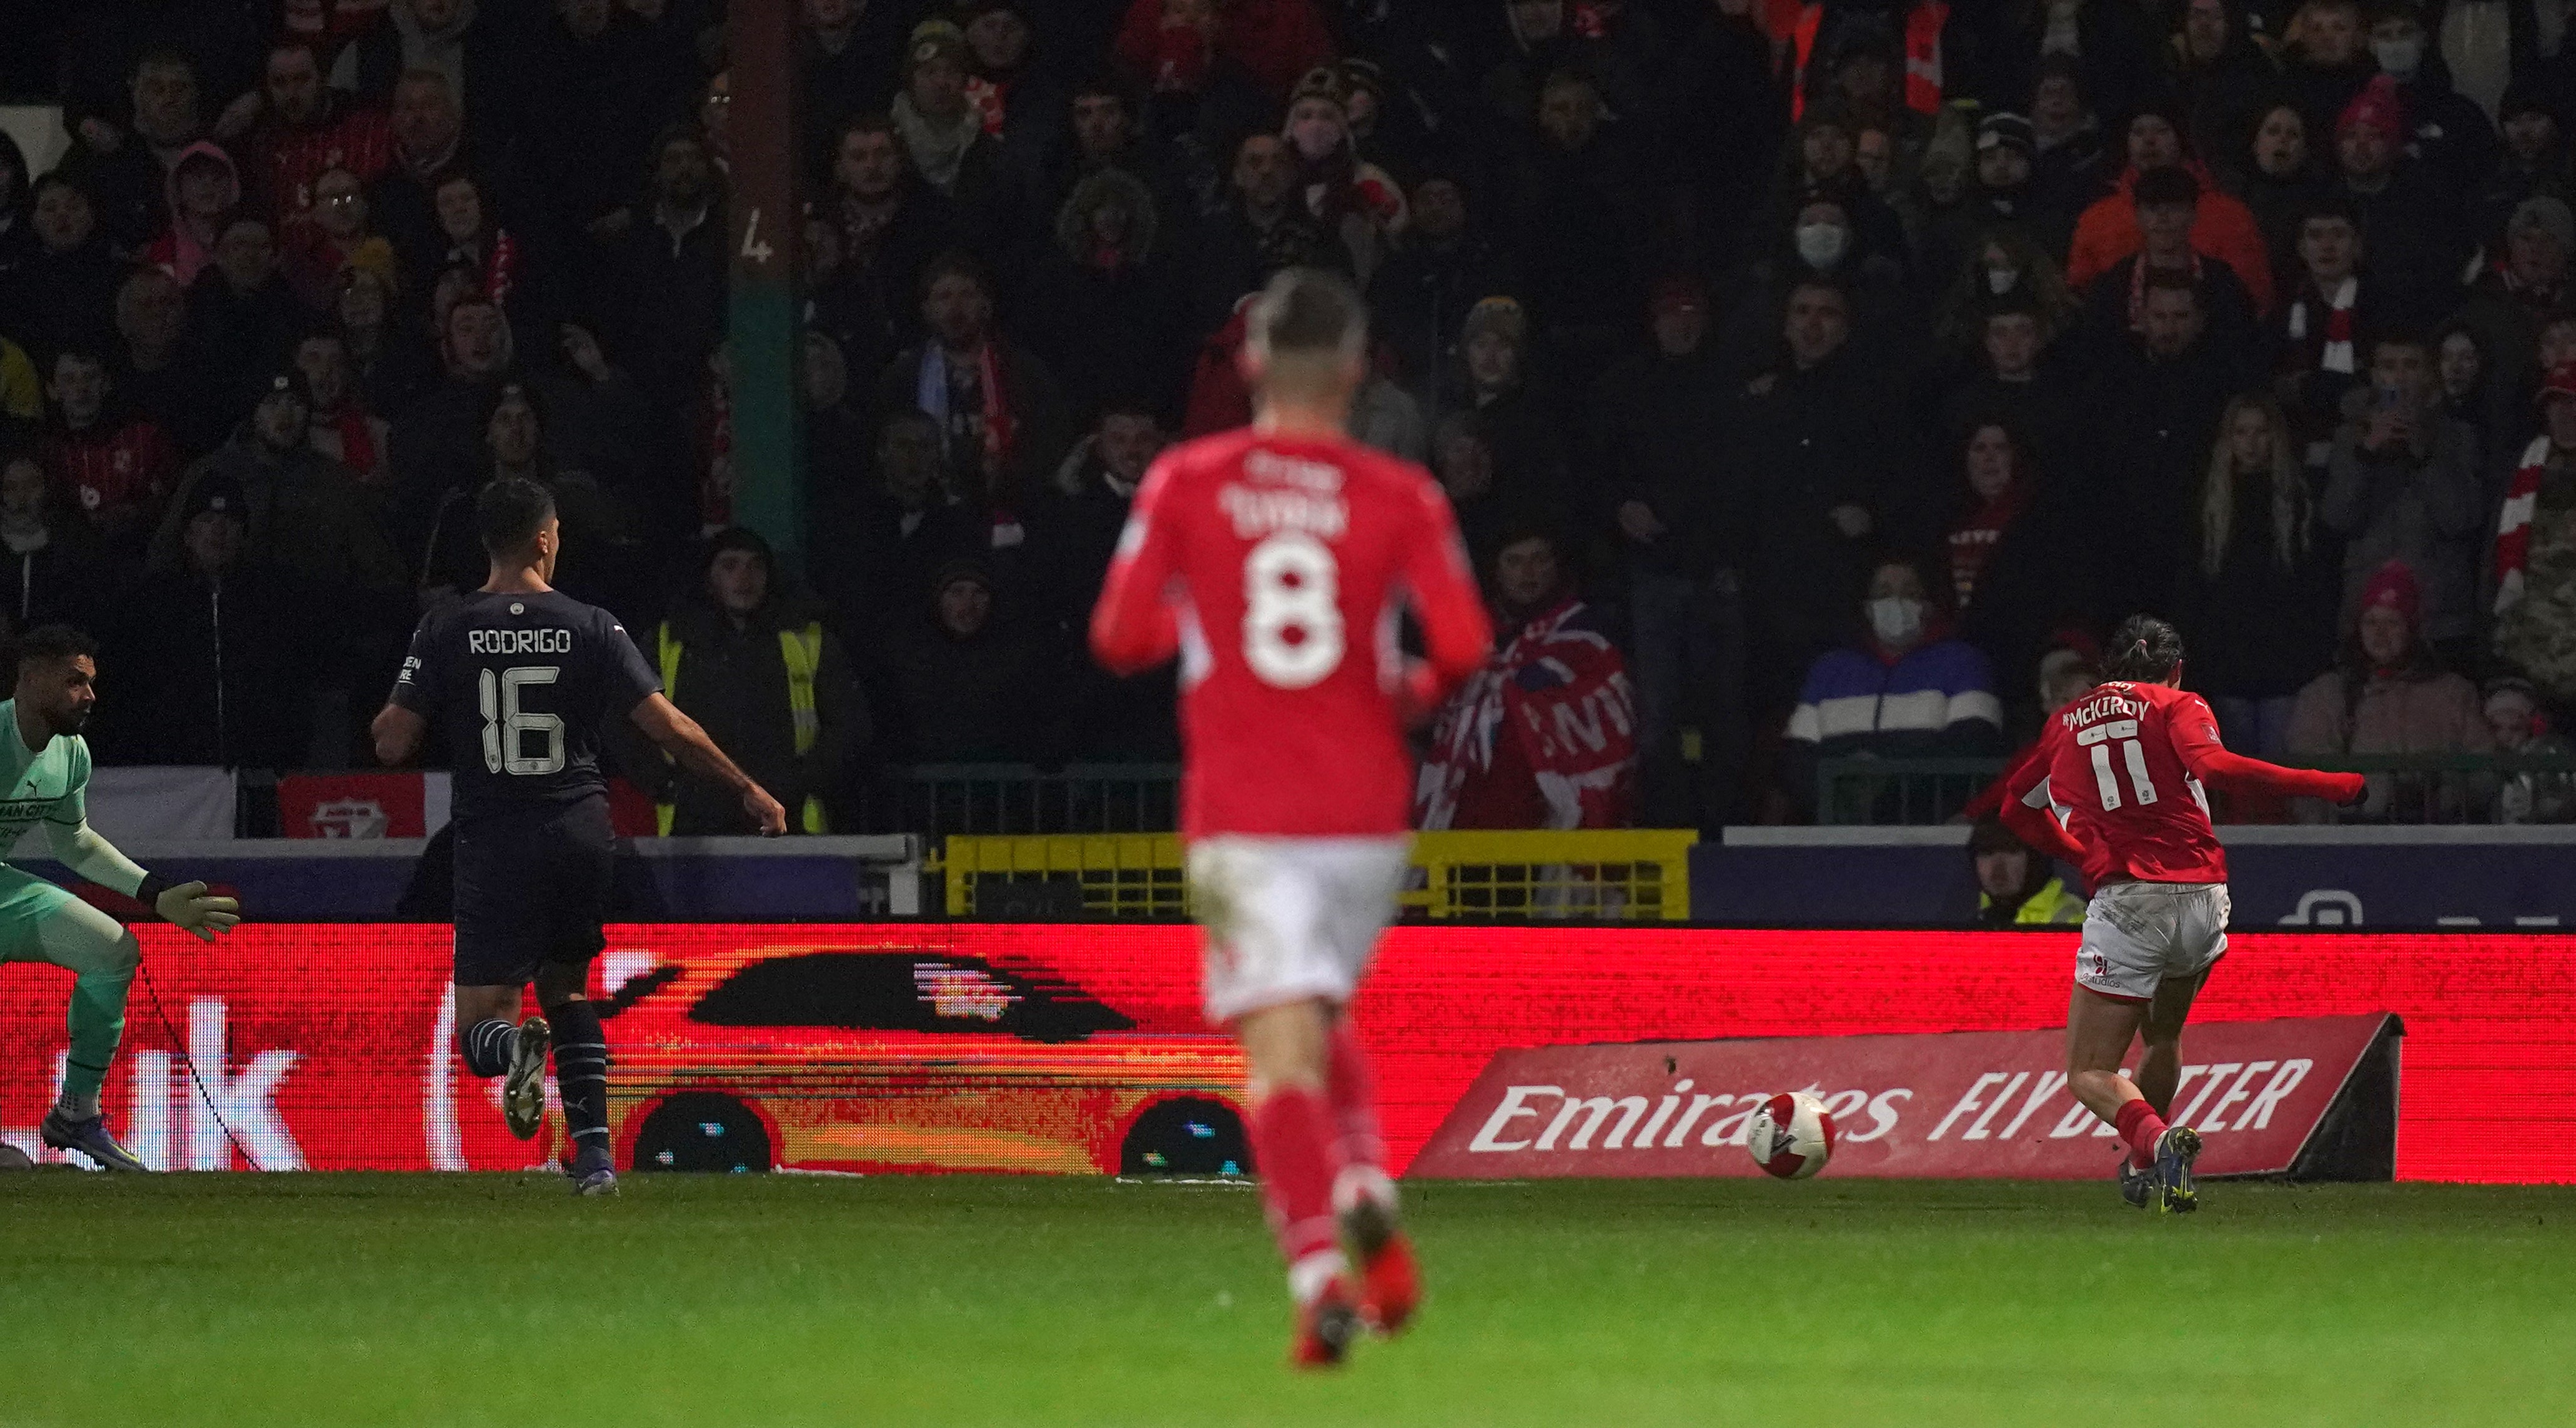 Harry McKirdy scored Swindon’s only goal against Manchester City in January (Adam Davy/PA)